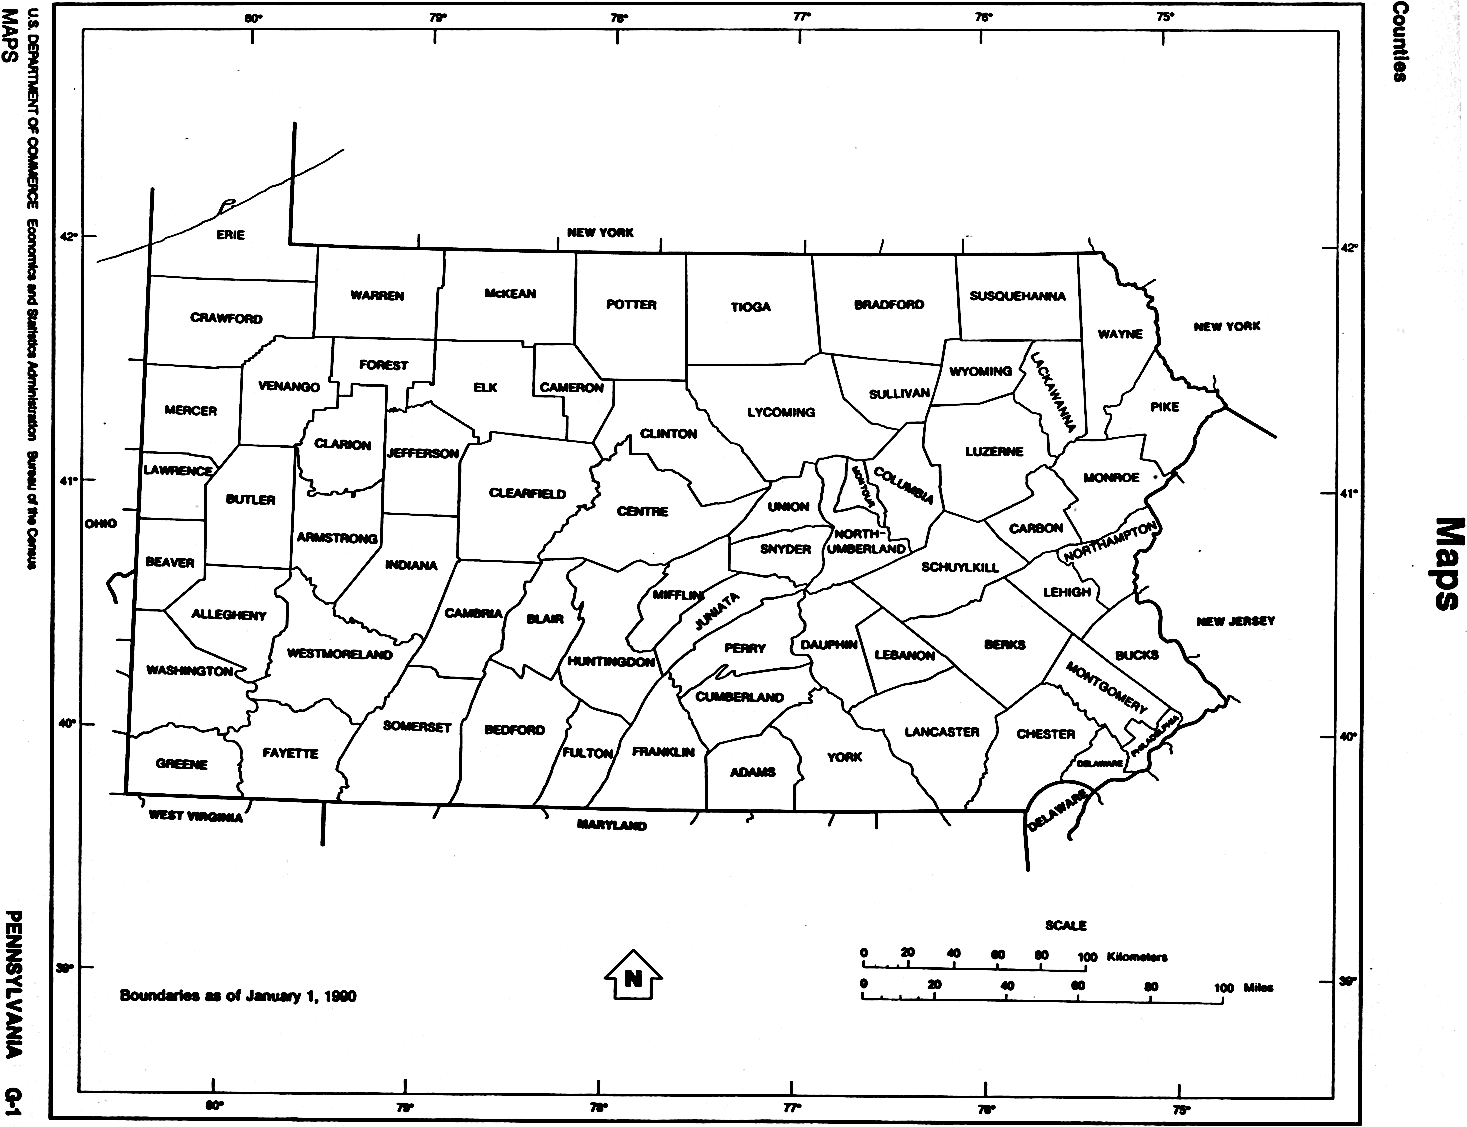 Pennsylvania Counties map with outline and location of each county in PA